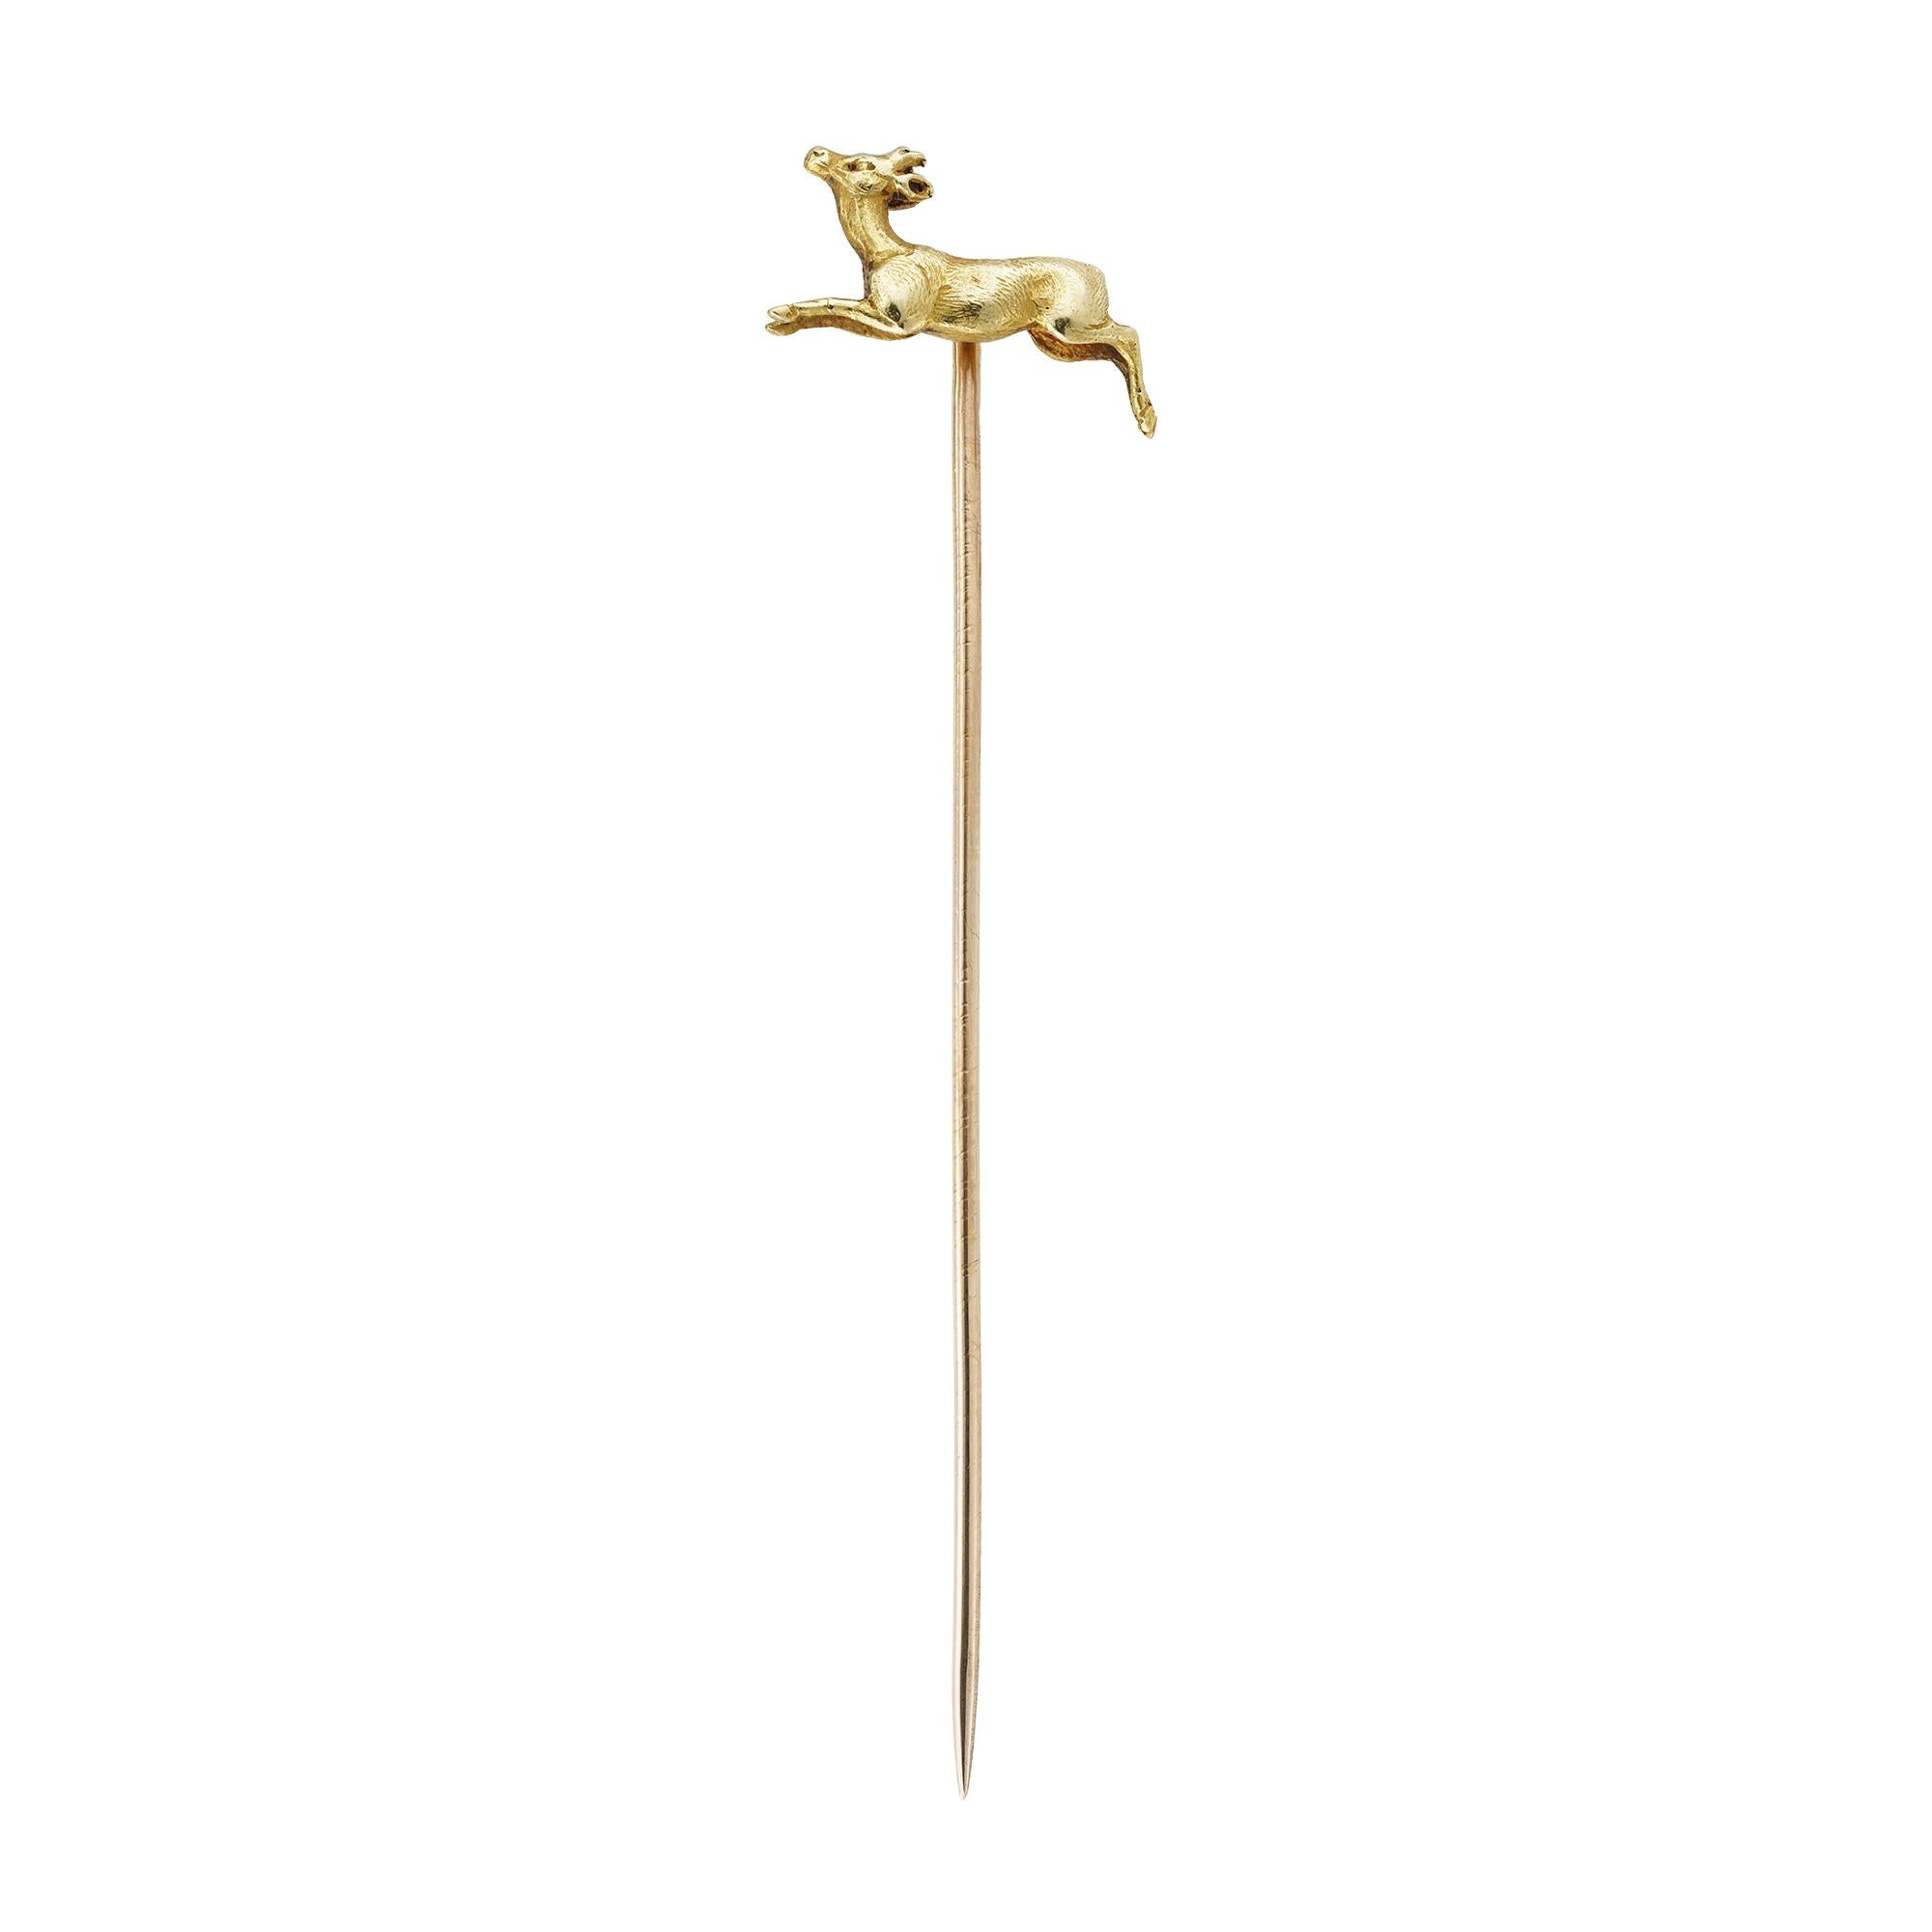 A Belle Époque gold buck stick pin, the realistically carved buck attached to a gold pin, bearing gold eagle mark and indistinct makers mark, circa 1900, the doe measuring approximately 1.7 x 1.2cm, the pin measuring 6.3cm long, gross weight 2.9